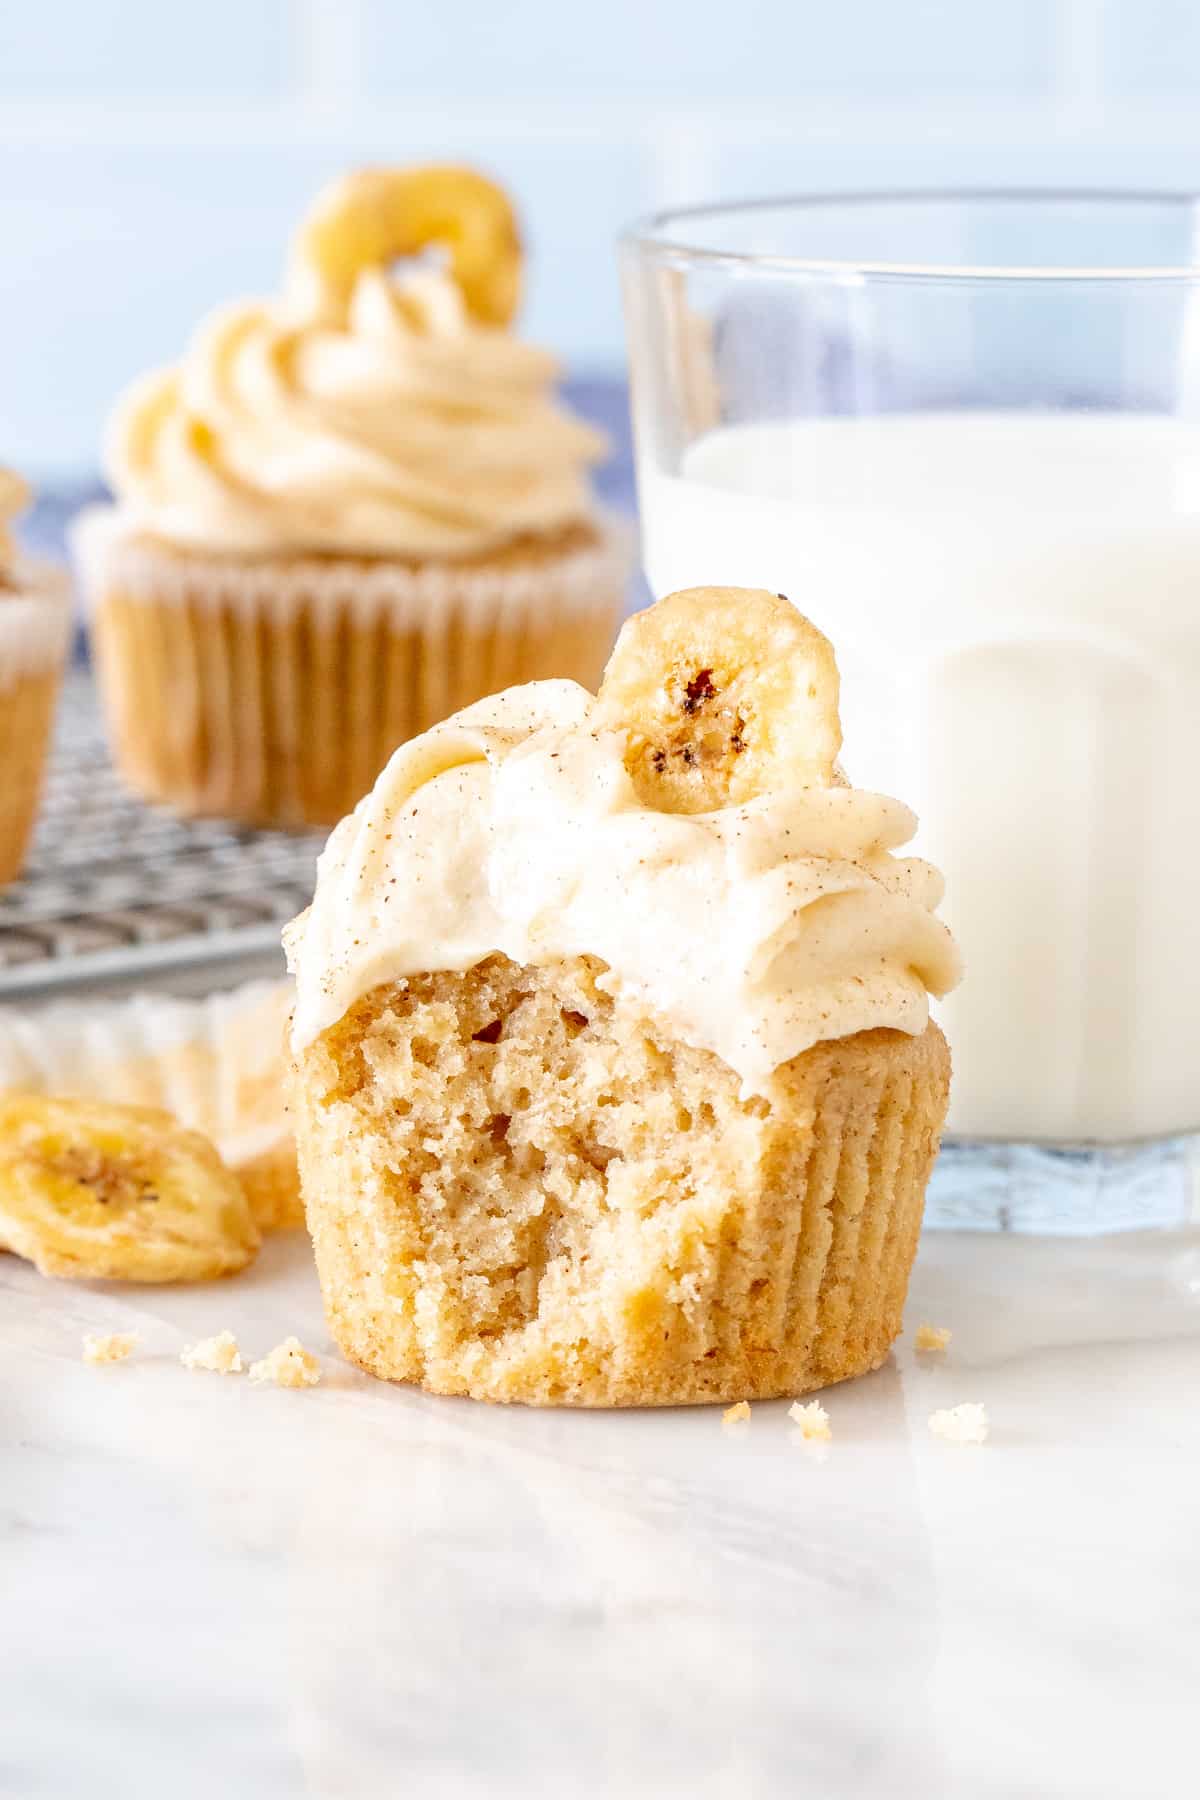 Banana bread cupcake with frosting on top with a bite taken out of it